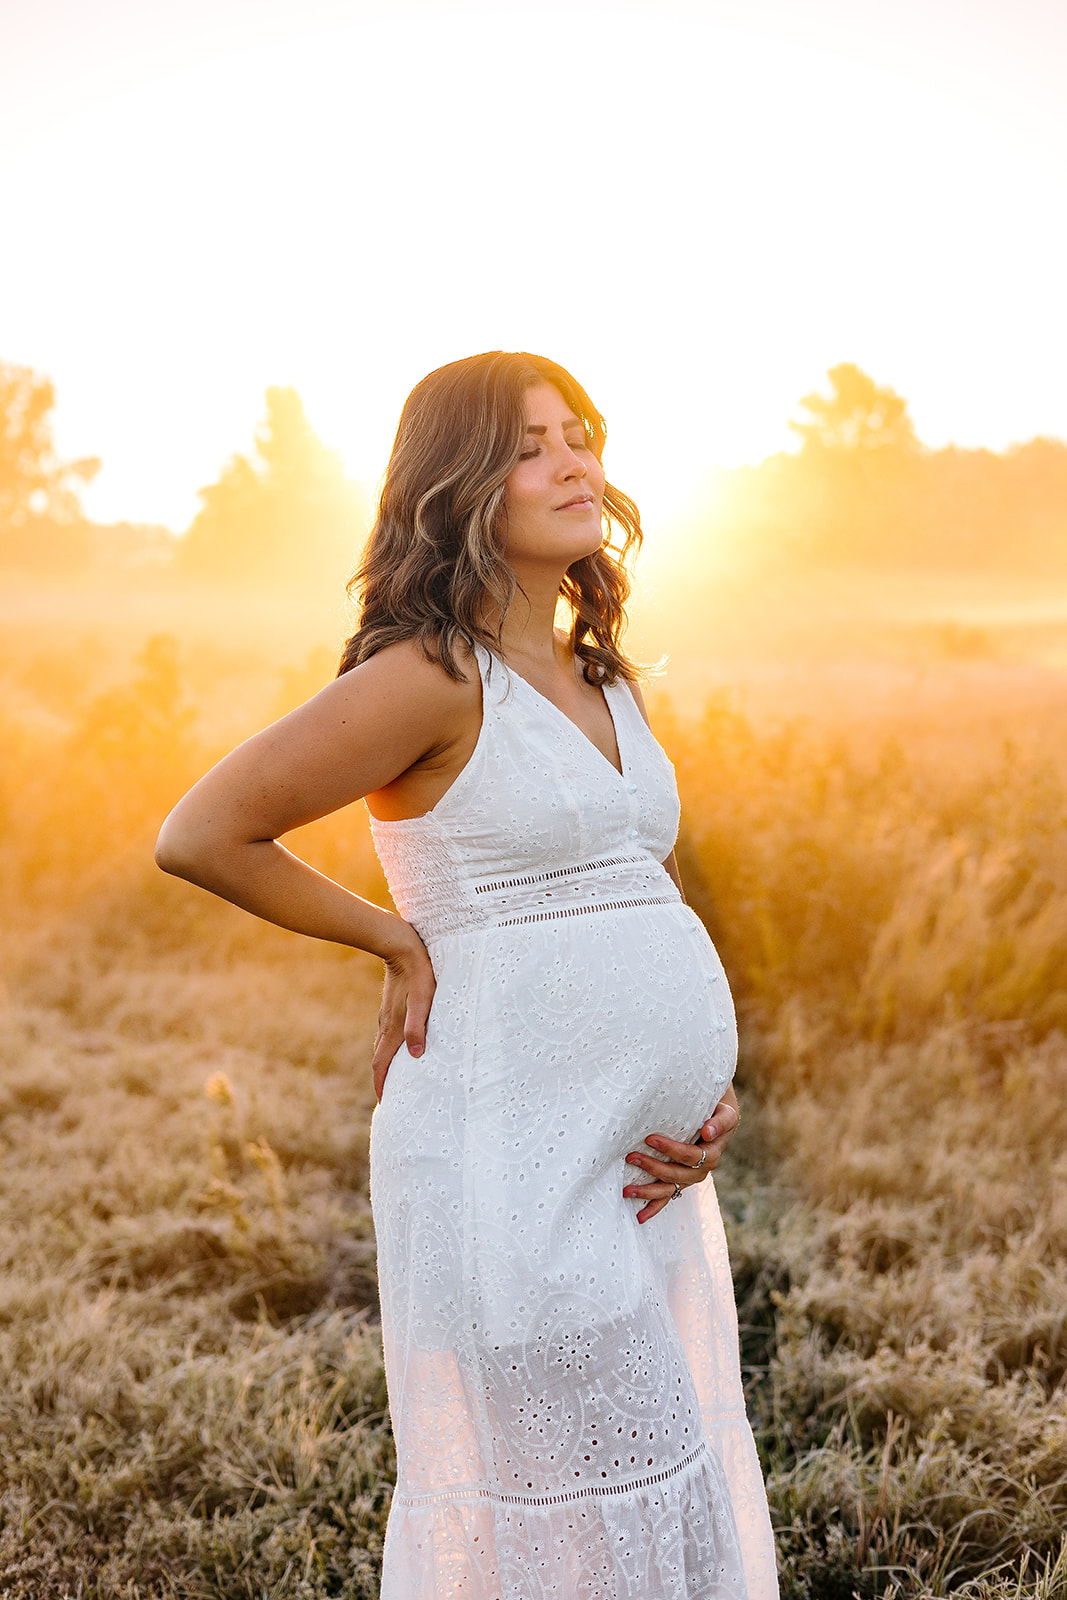 Maternity photoshoot tips featuring a woman in a white dress cradling her belly, standing alone in a field.